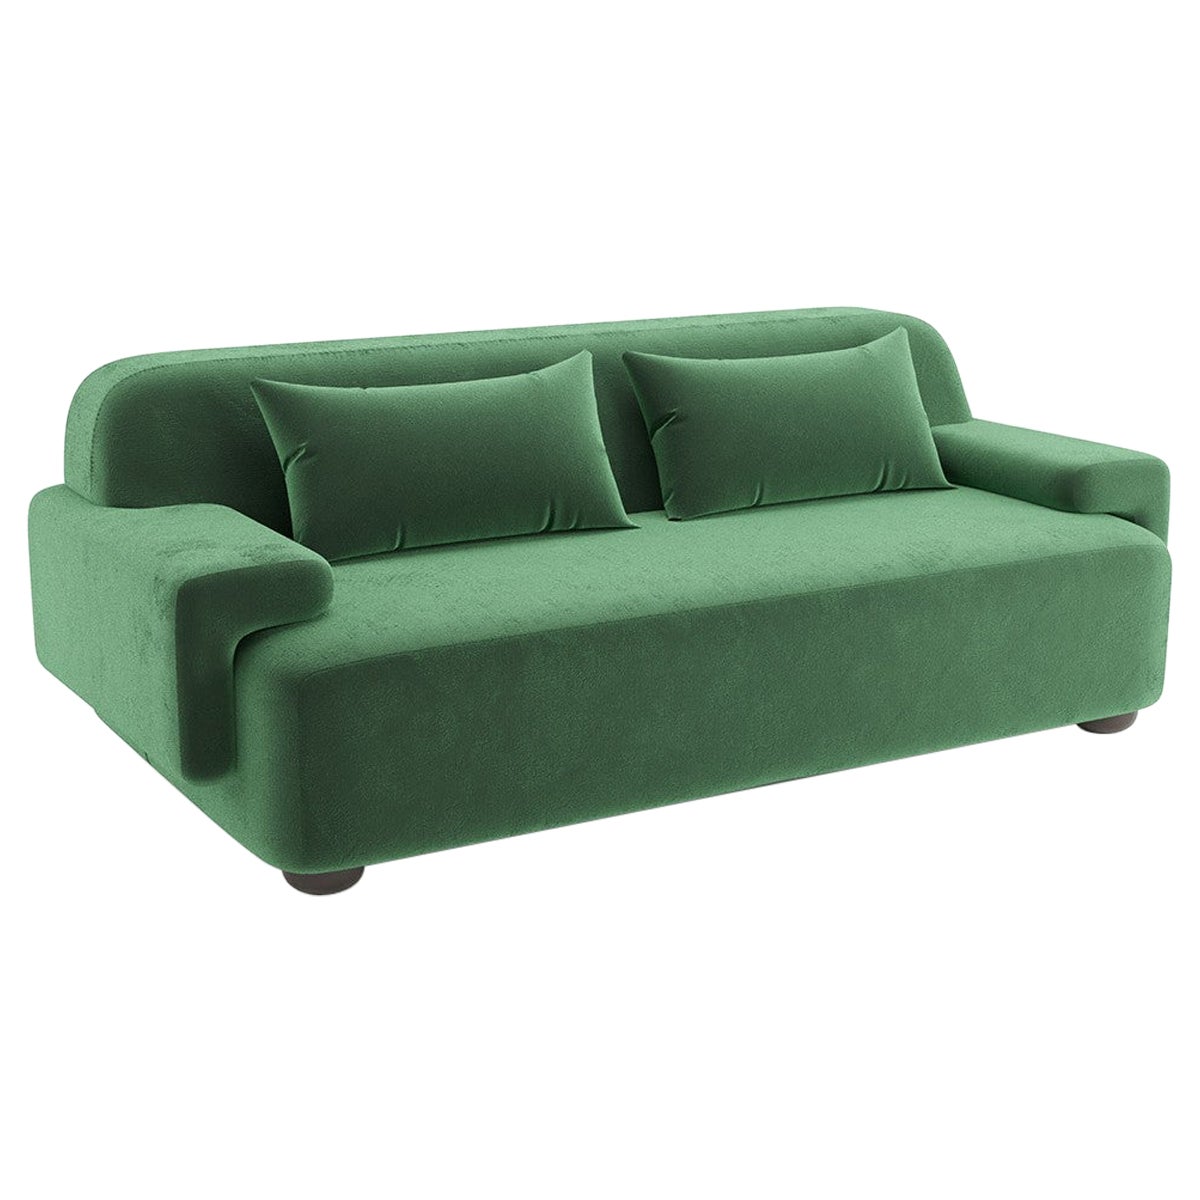 Popus Editions Lena 2.5 Seater Sofa in Green '771727' Como Velvet Upholstery For Sale